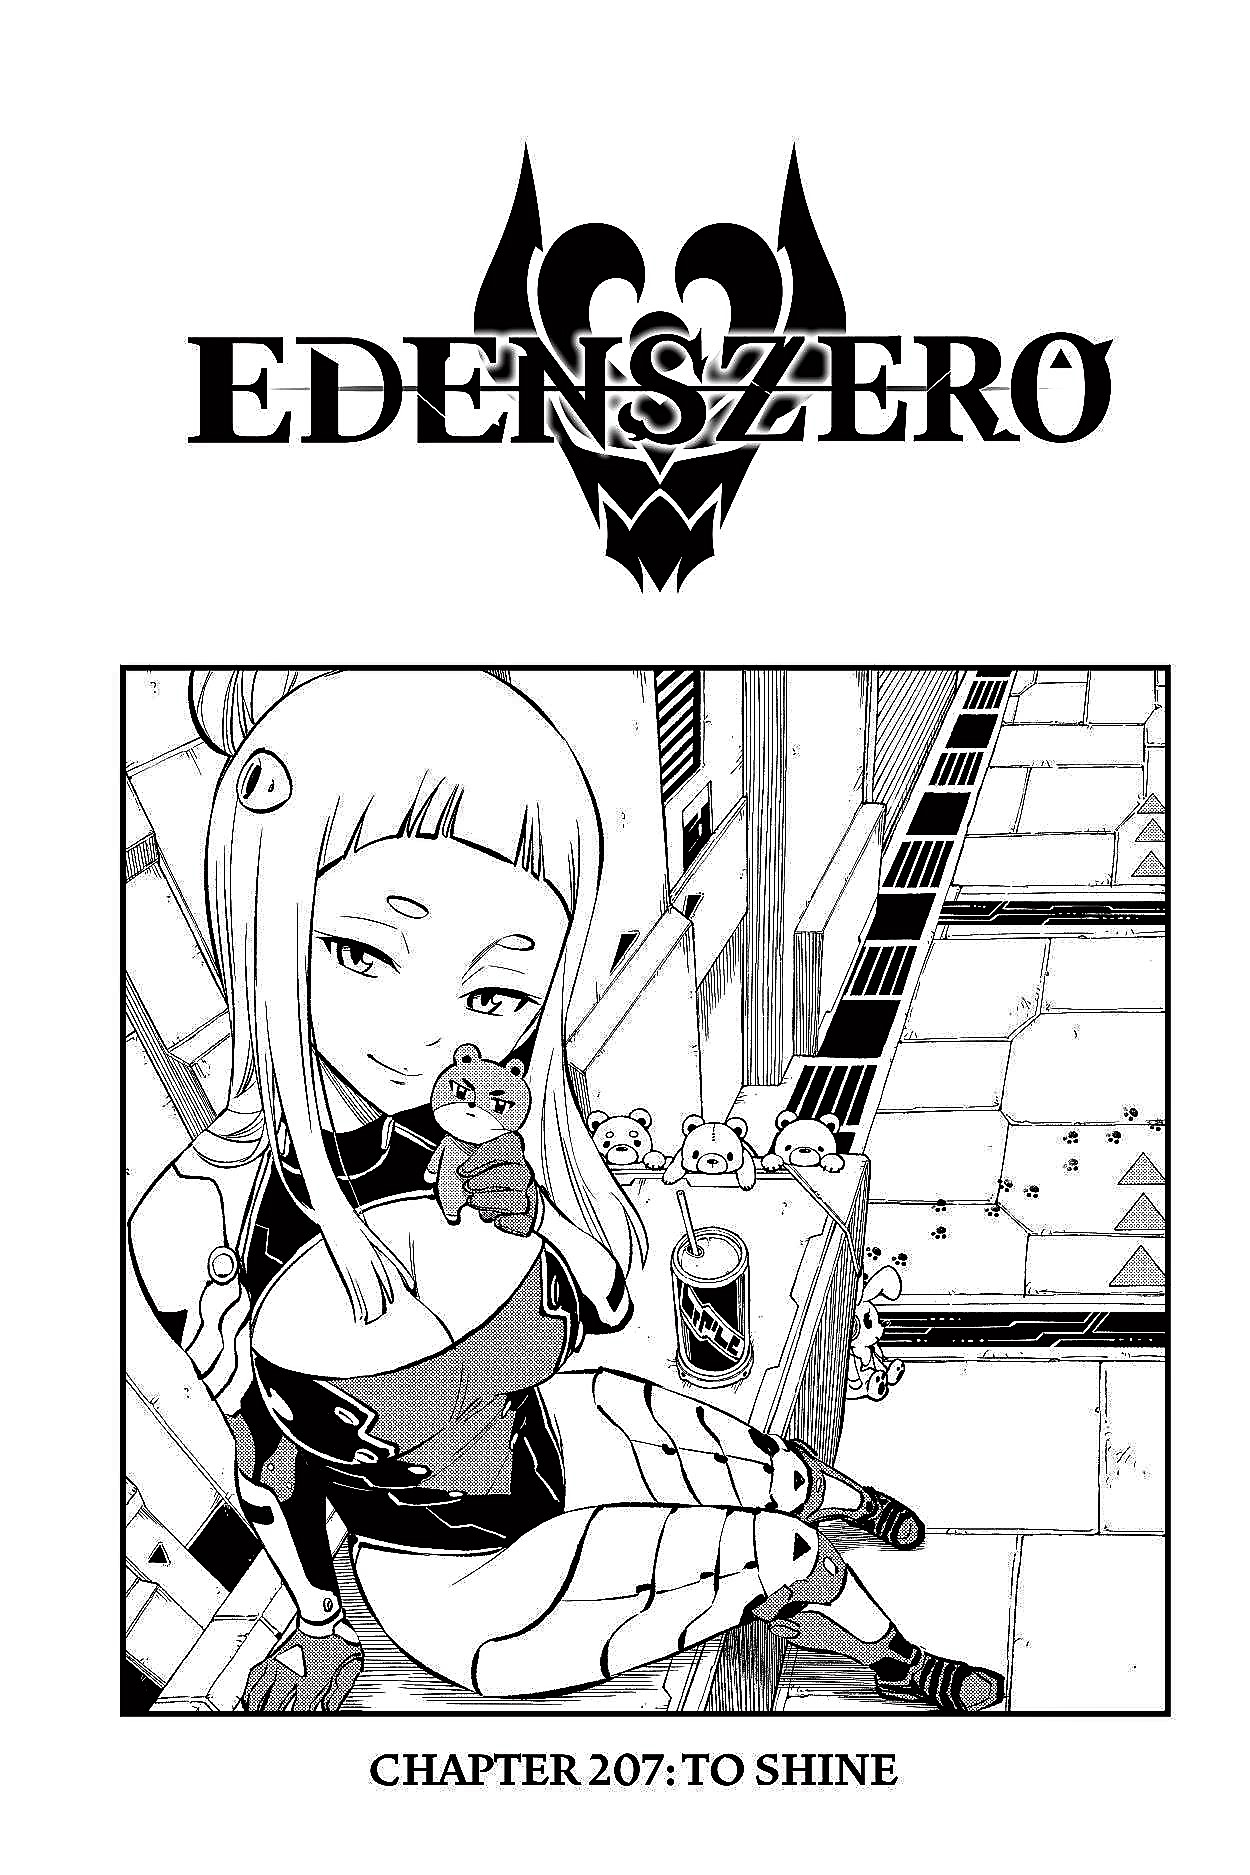 “Perfectly Balanced- As All Things Should Be.” Edens Zero Chapter 207 BREAKDOWN